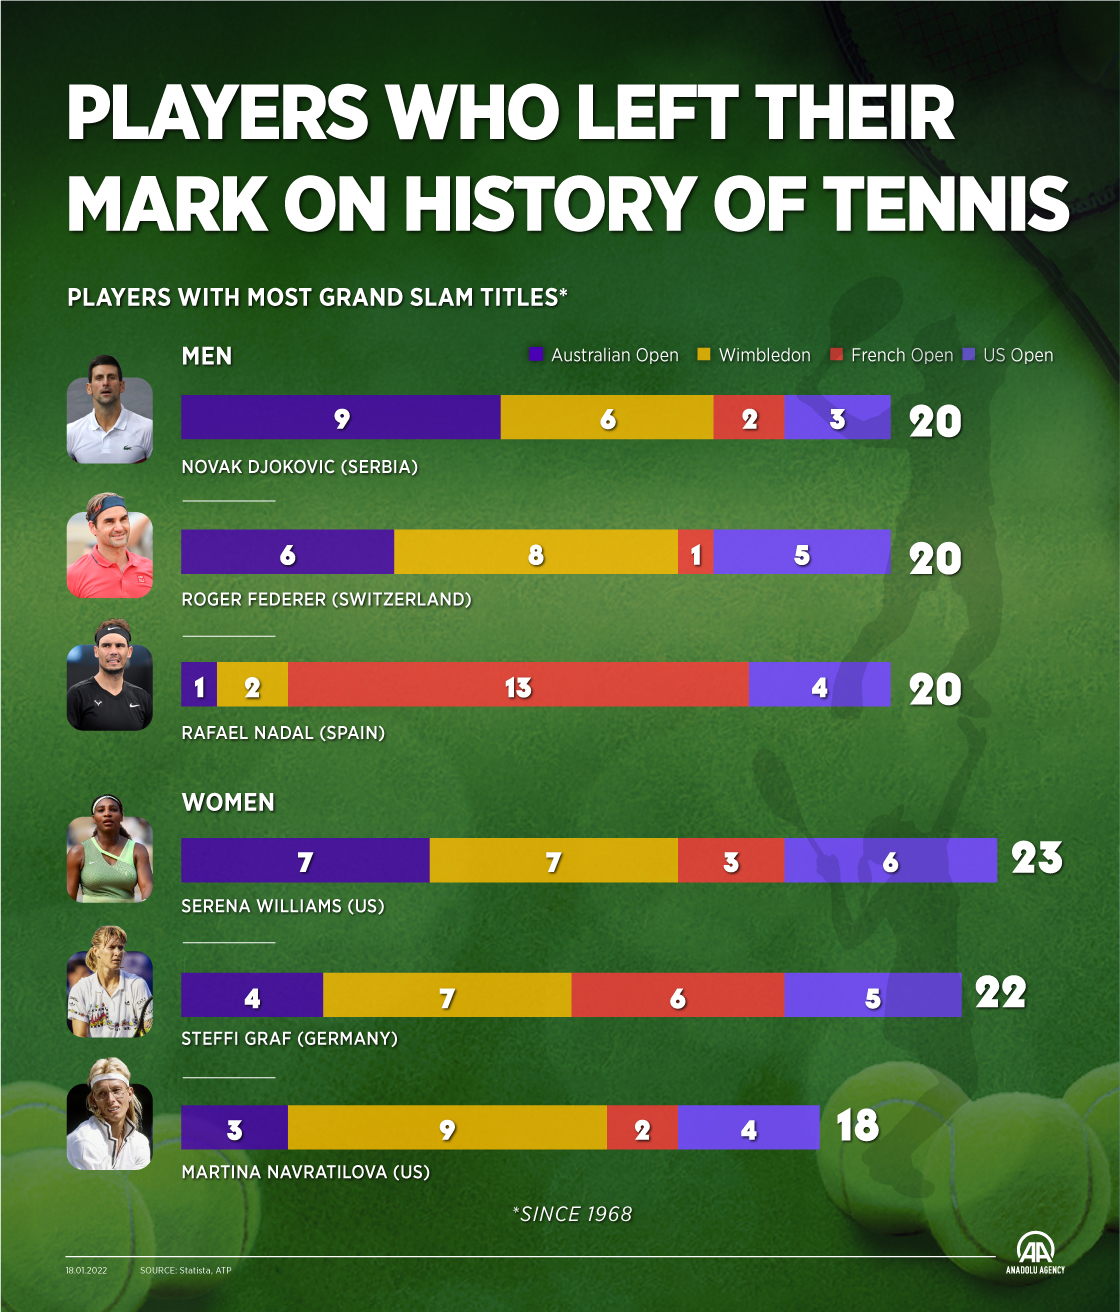 Players who left their mark on history of tennis